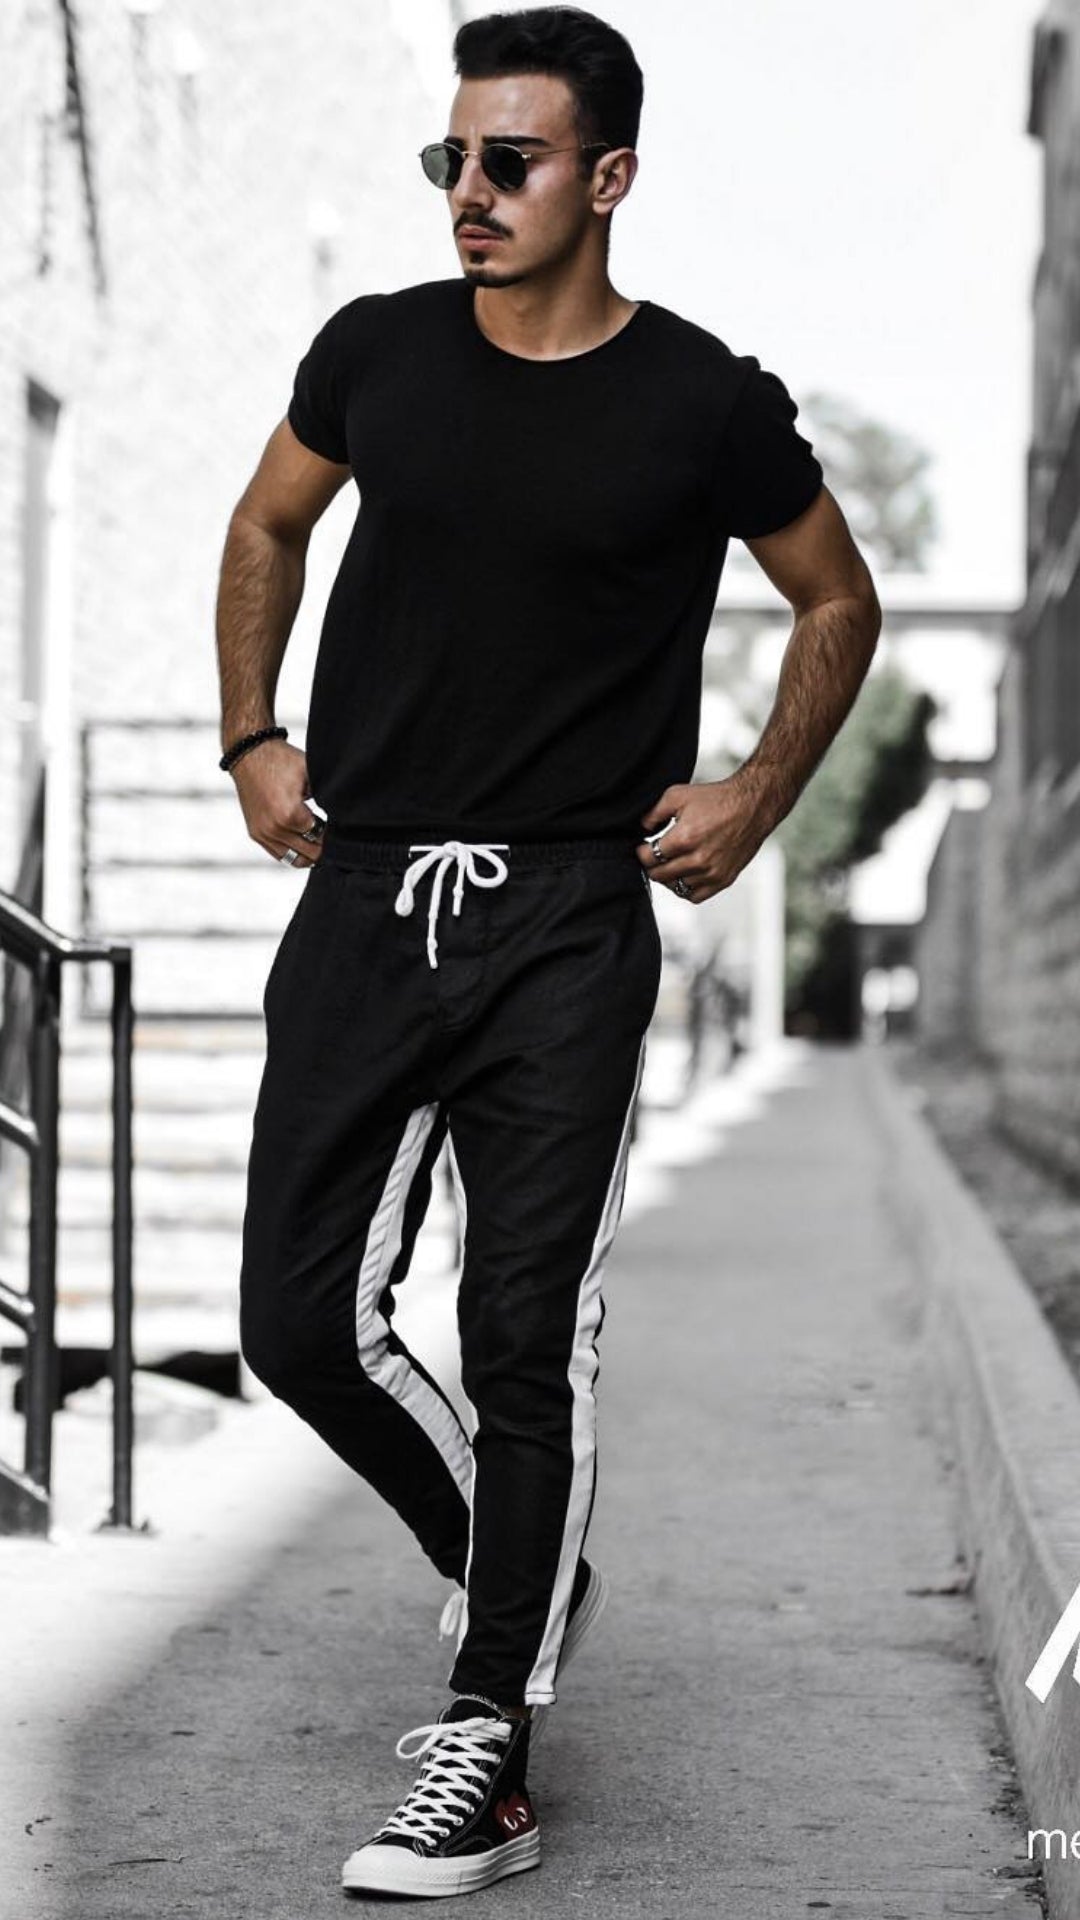 black jogger outfits guys